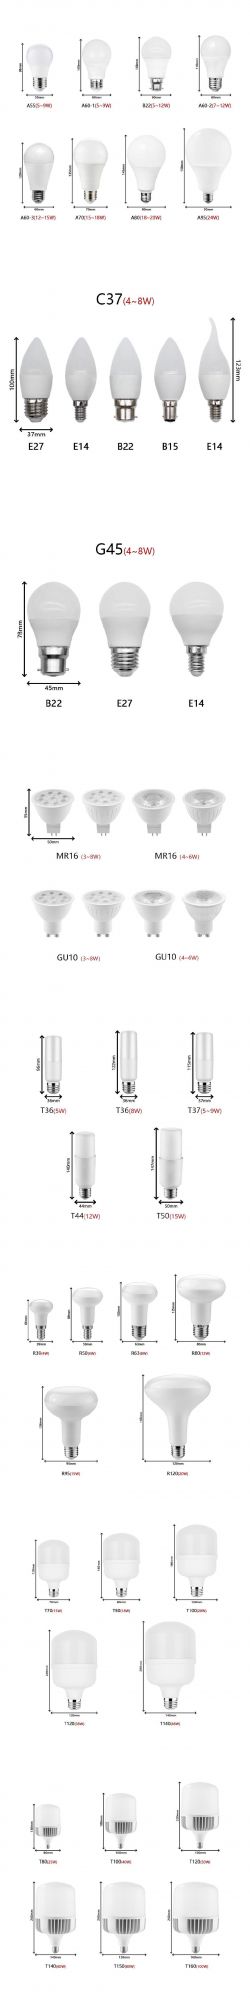 LED Bulb Lamp Light Manufacture From China Provide LED Bulb Energy Saving Lamp A60 5-12W E27 B22 for Indoor Lighting